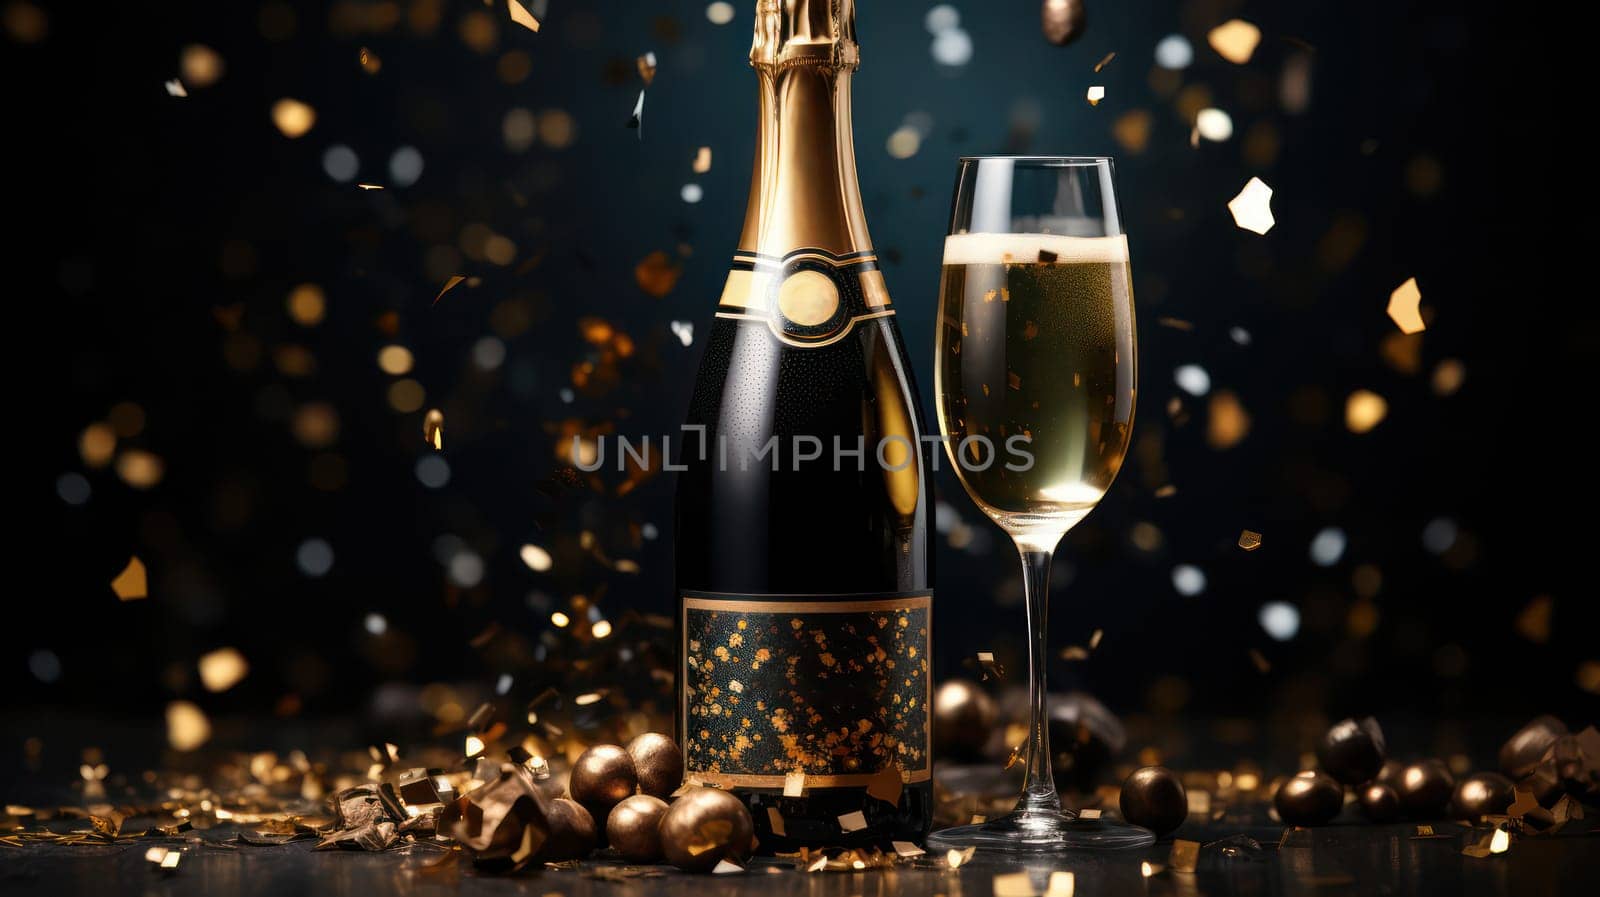 Bottle and glass of champagne gold shining background. Bright glitter, confetti and ornaments on dark blurred backdrop. New year eve, Christmas party festive banner with copy space